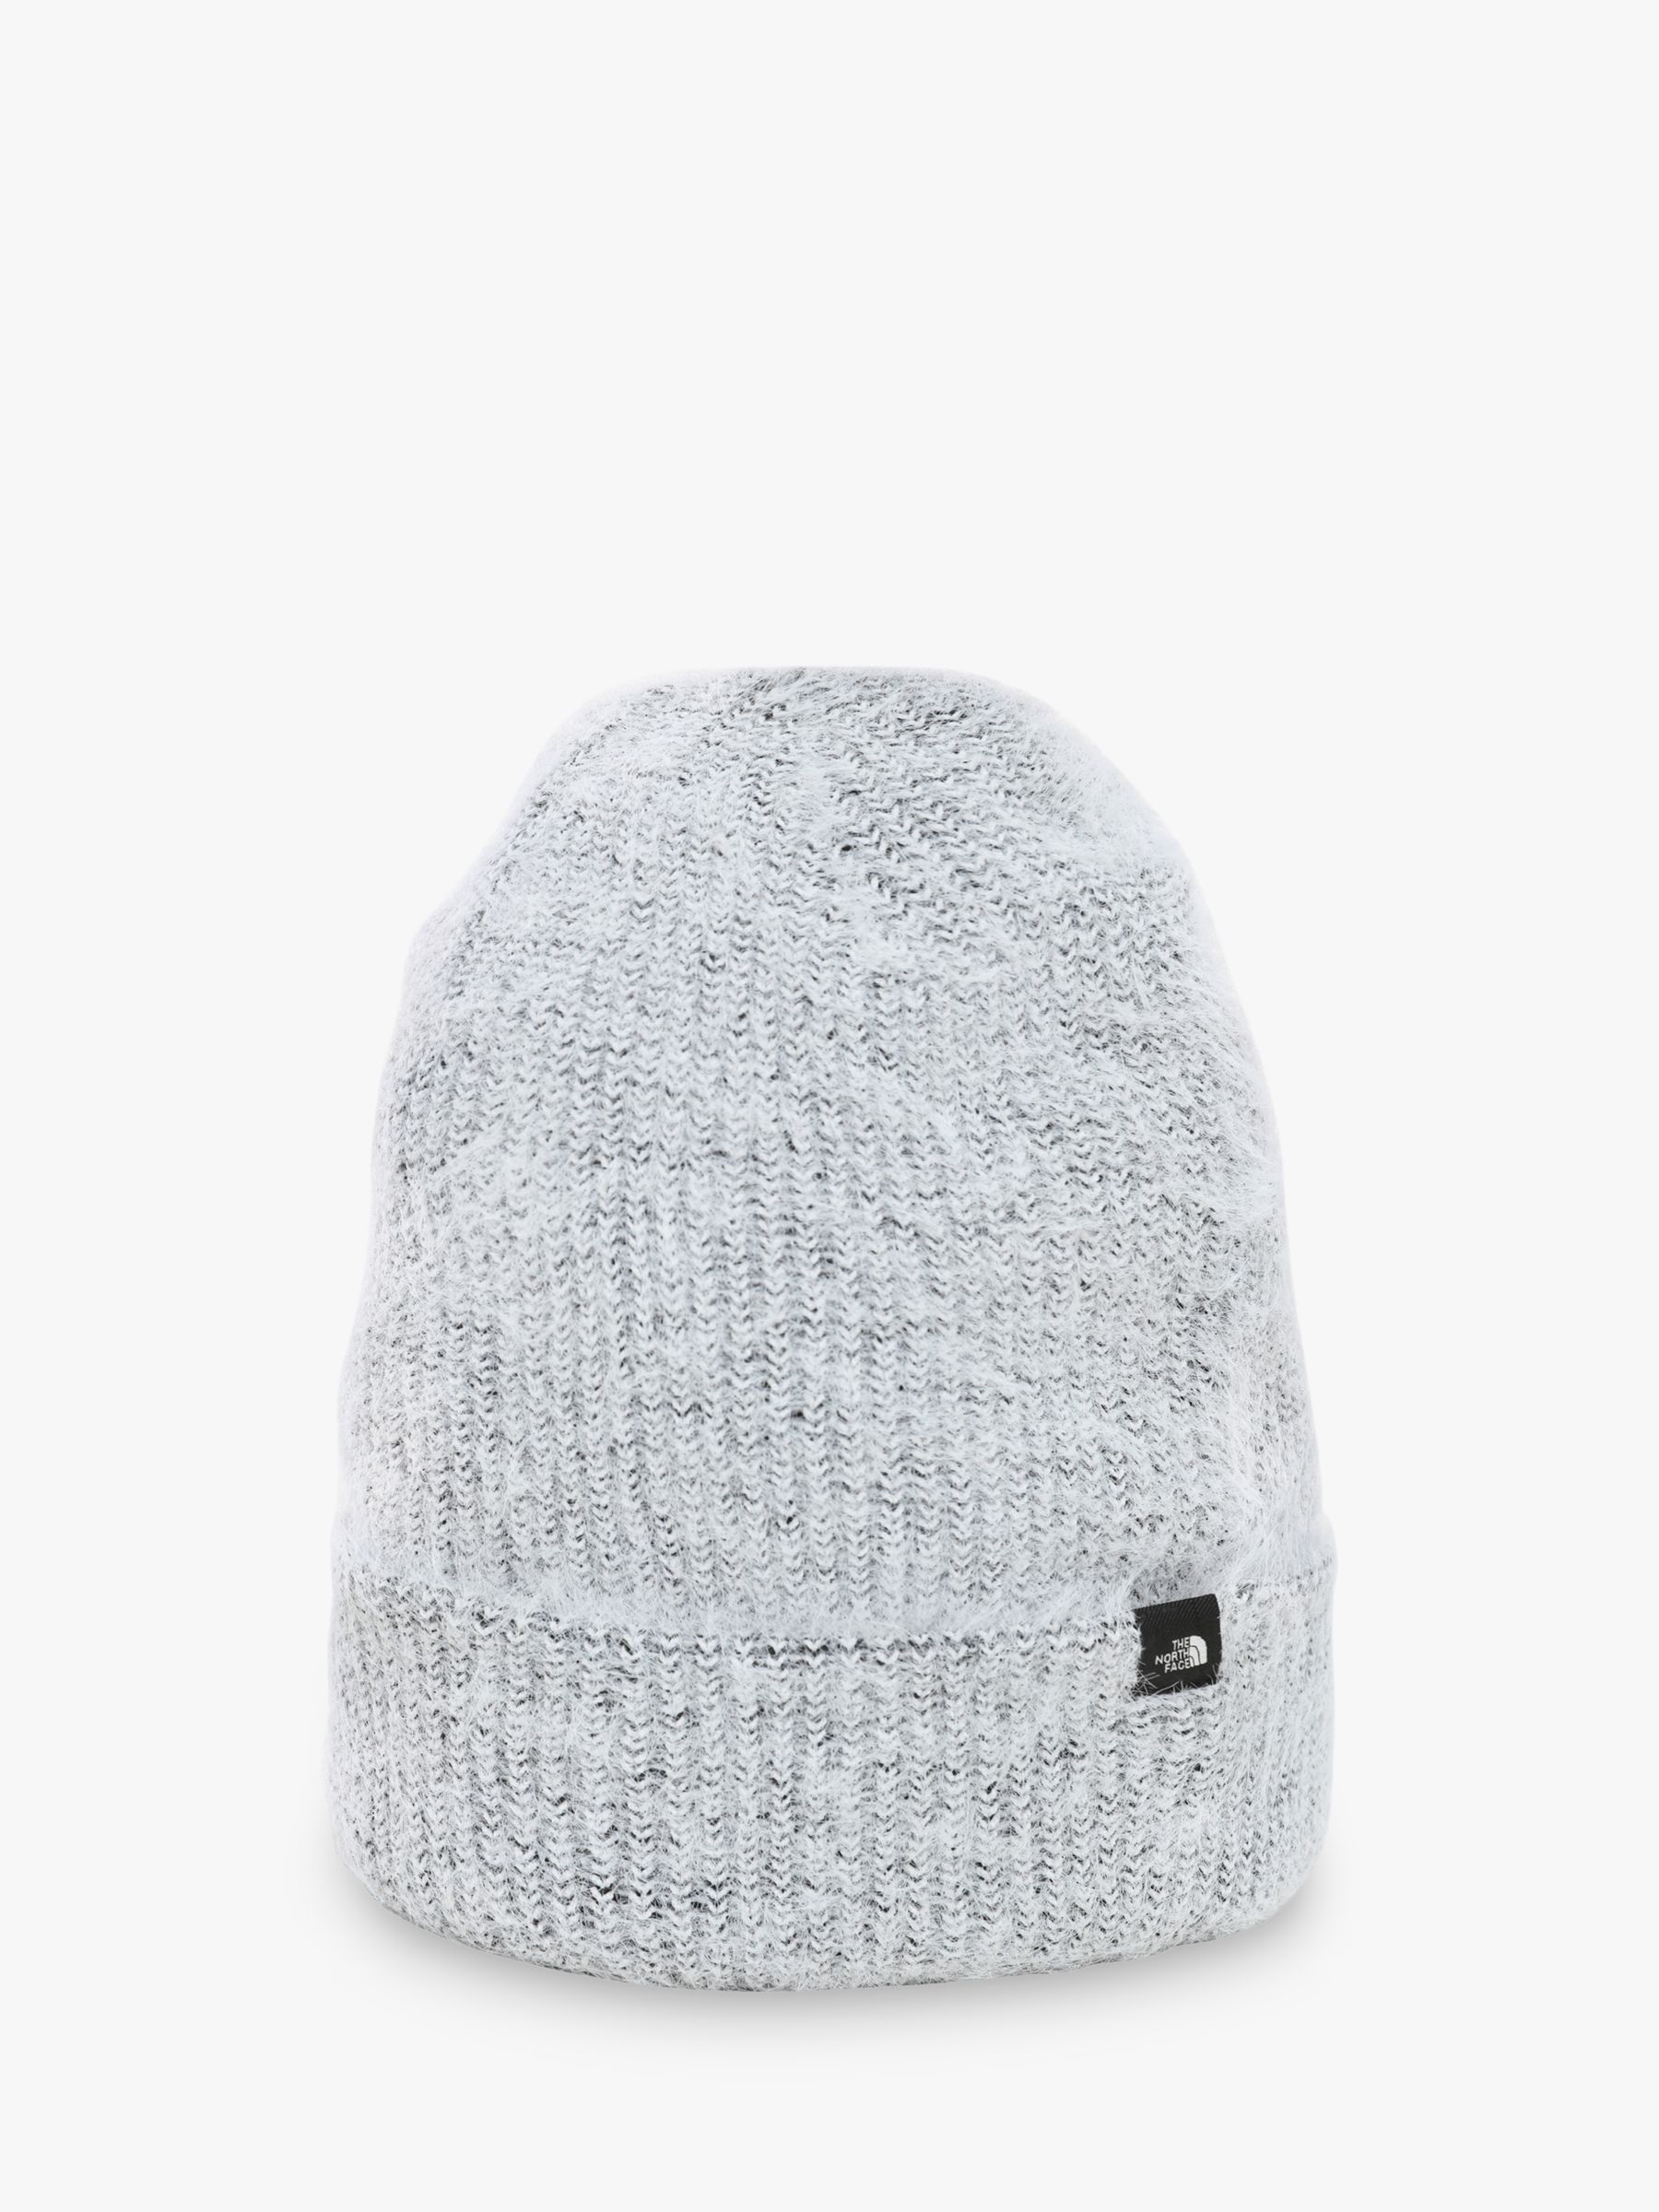 north face hat womens 